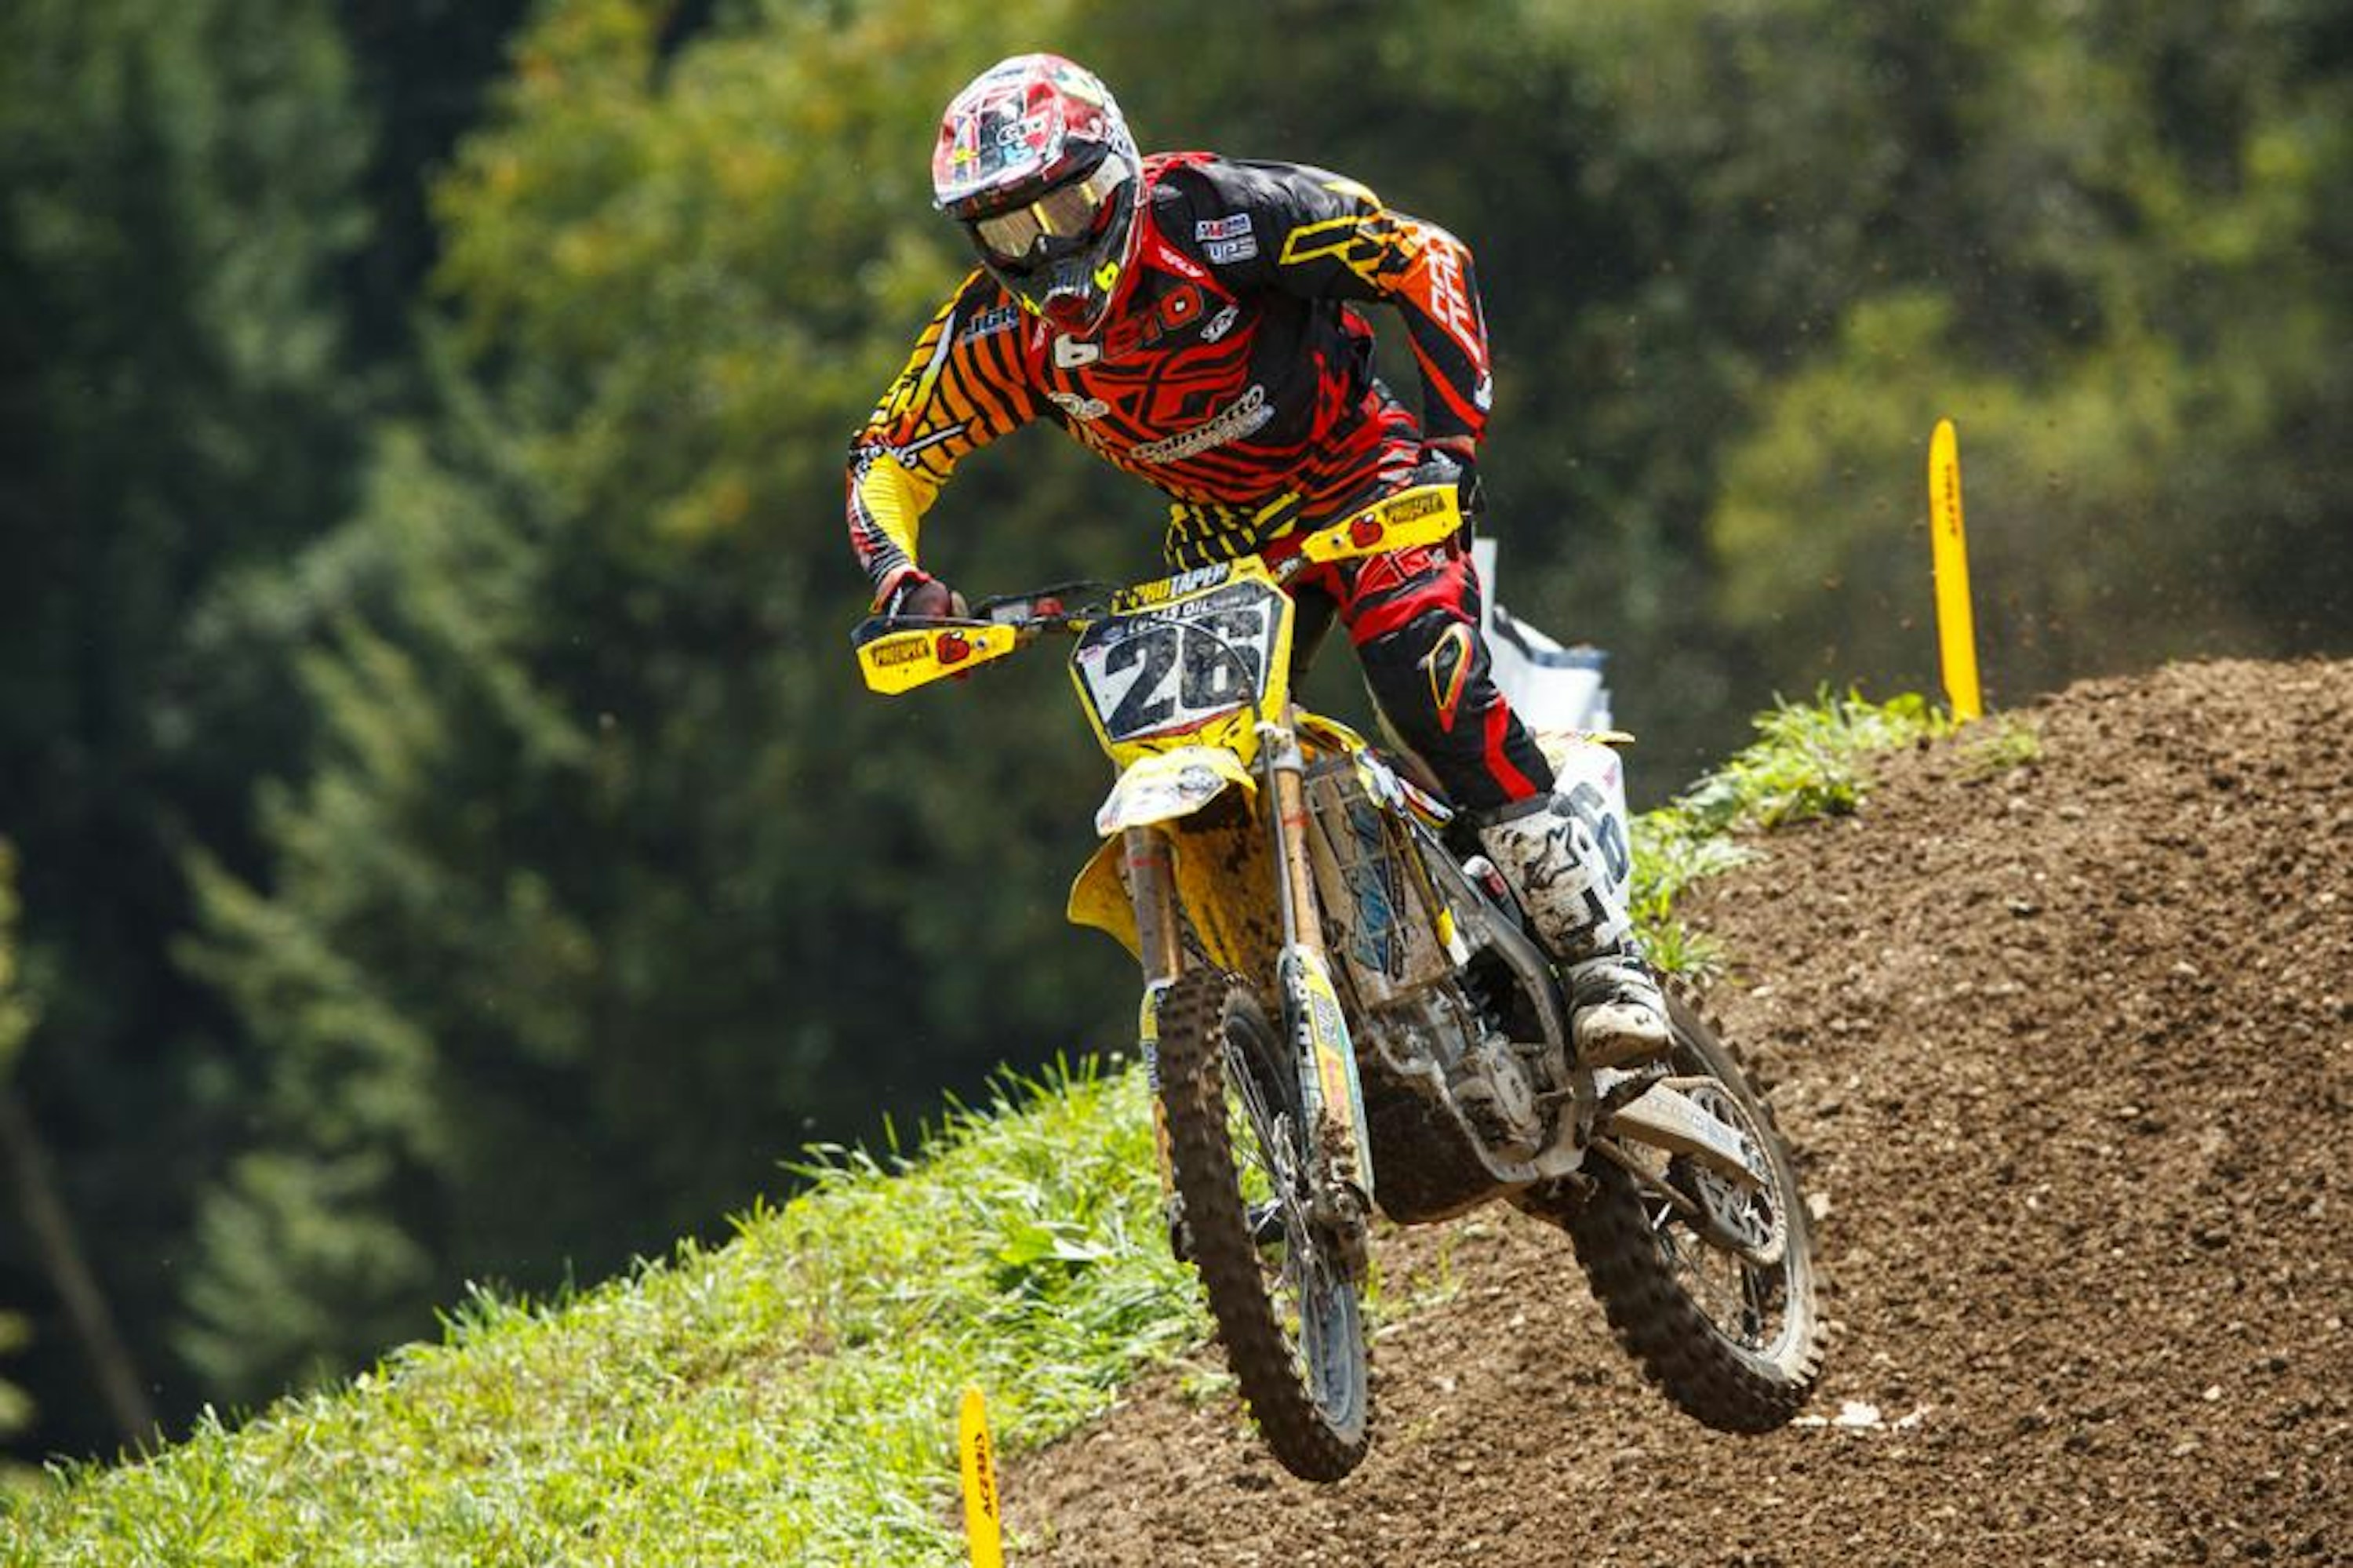 The Bamboo Body - Blog - Riders training: muscle shortening in motocross